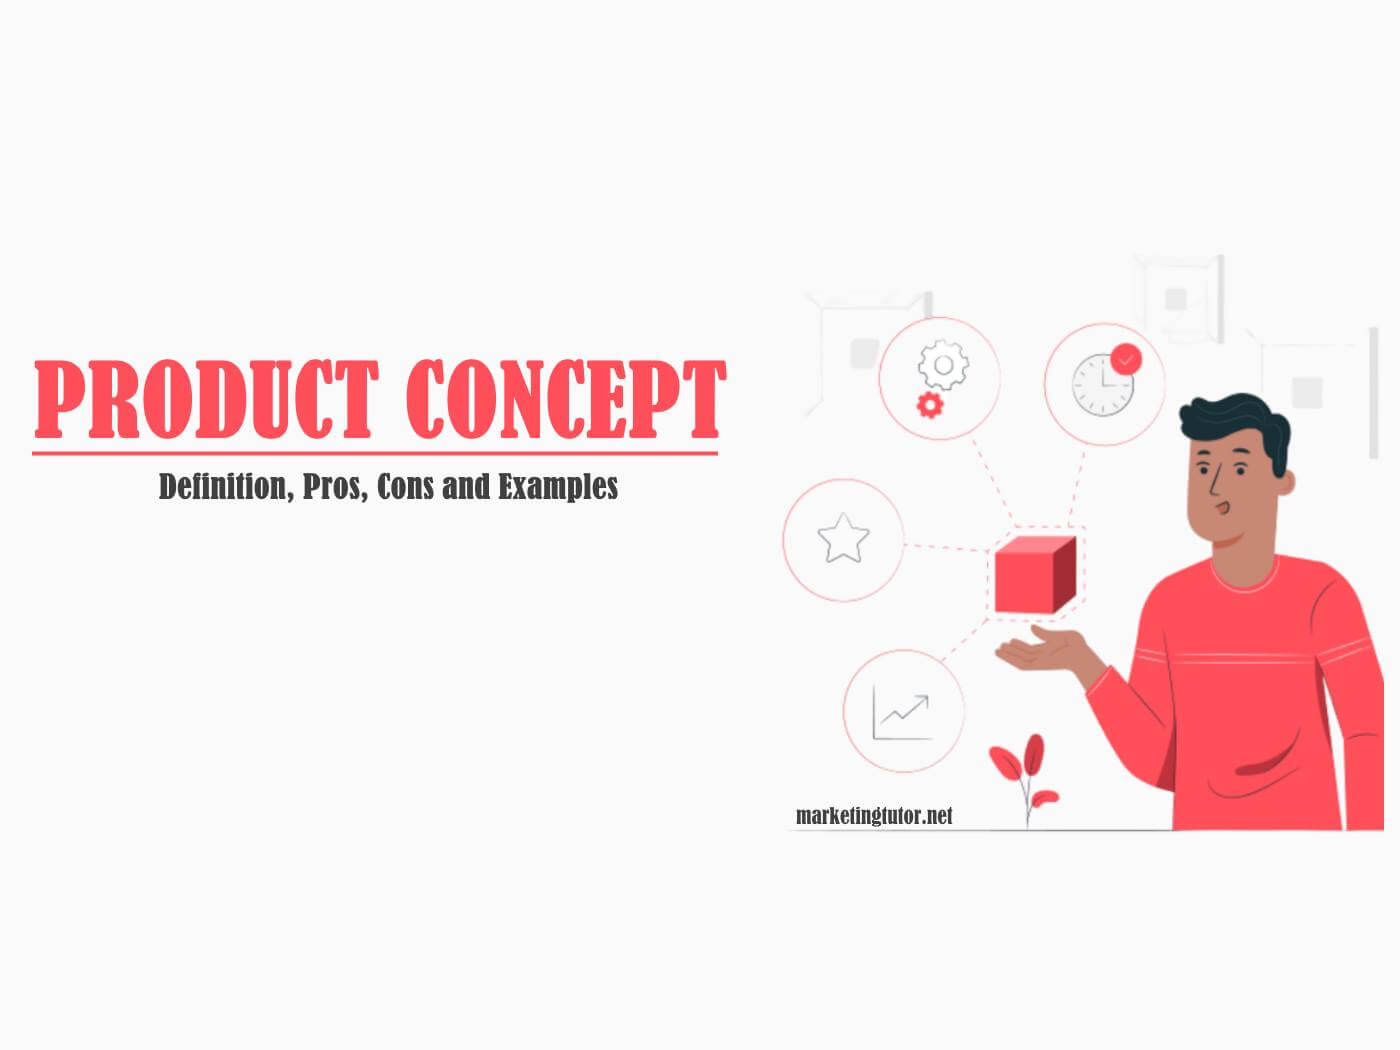 Product Concept Definition Examples Pros Cons Marketing Tutor